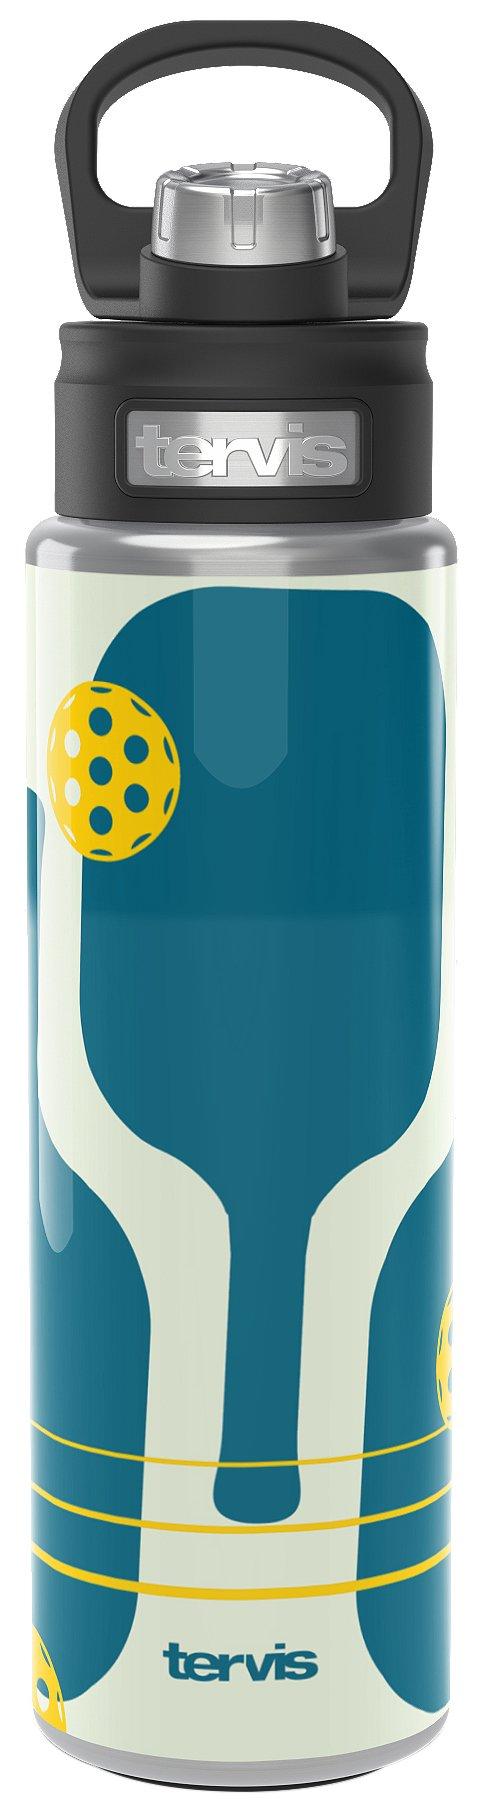 ELLO 20oz glass water bottle - general for sale - by owner